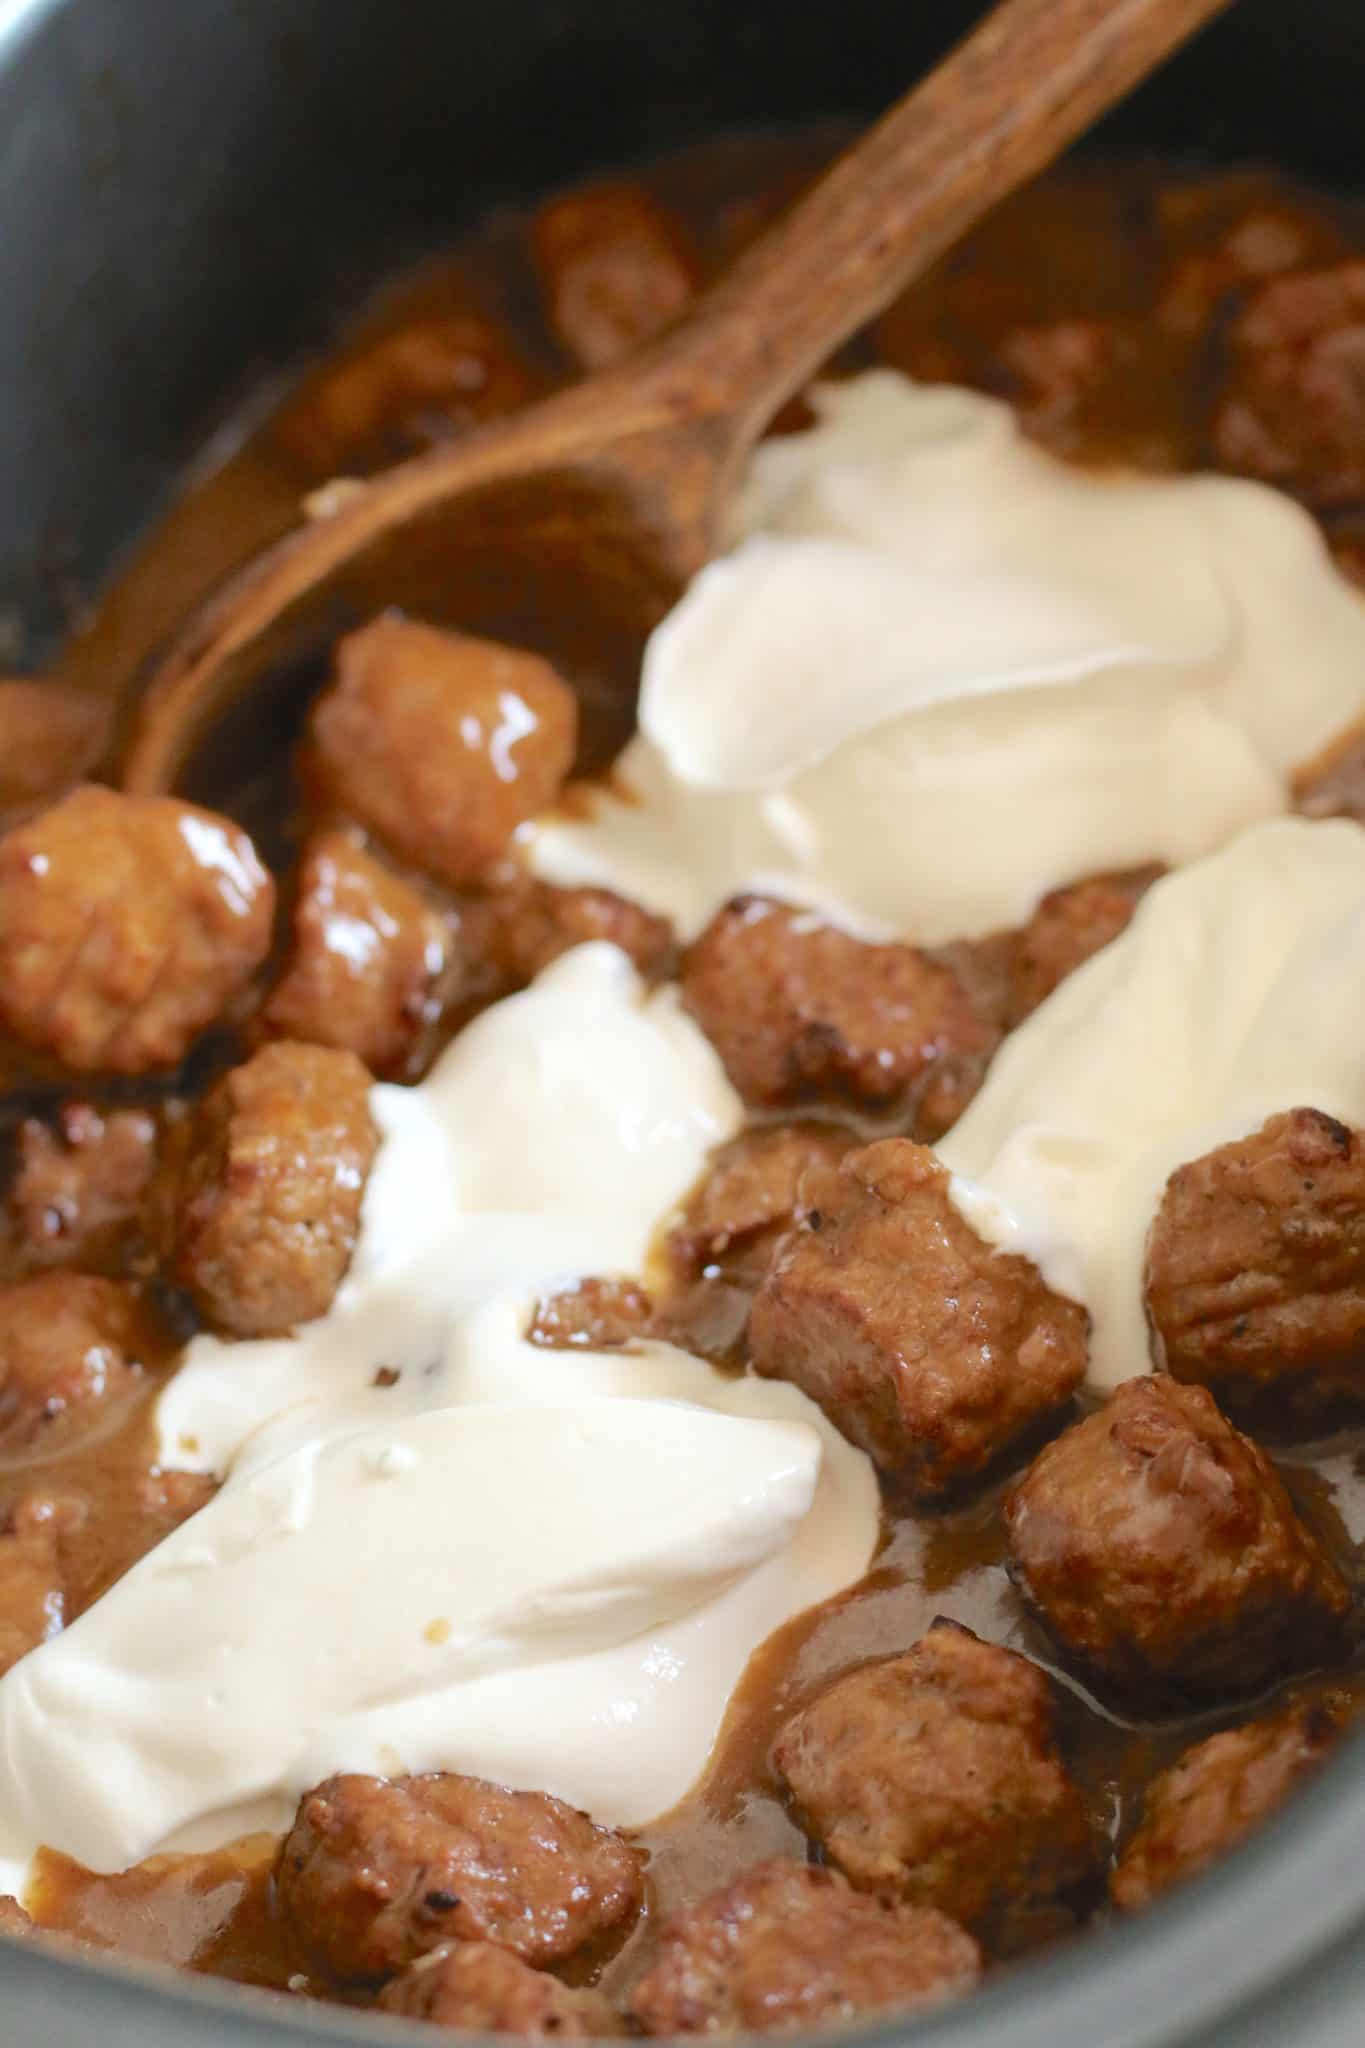 sour cream added to cooked meatballs and gravy